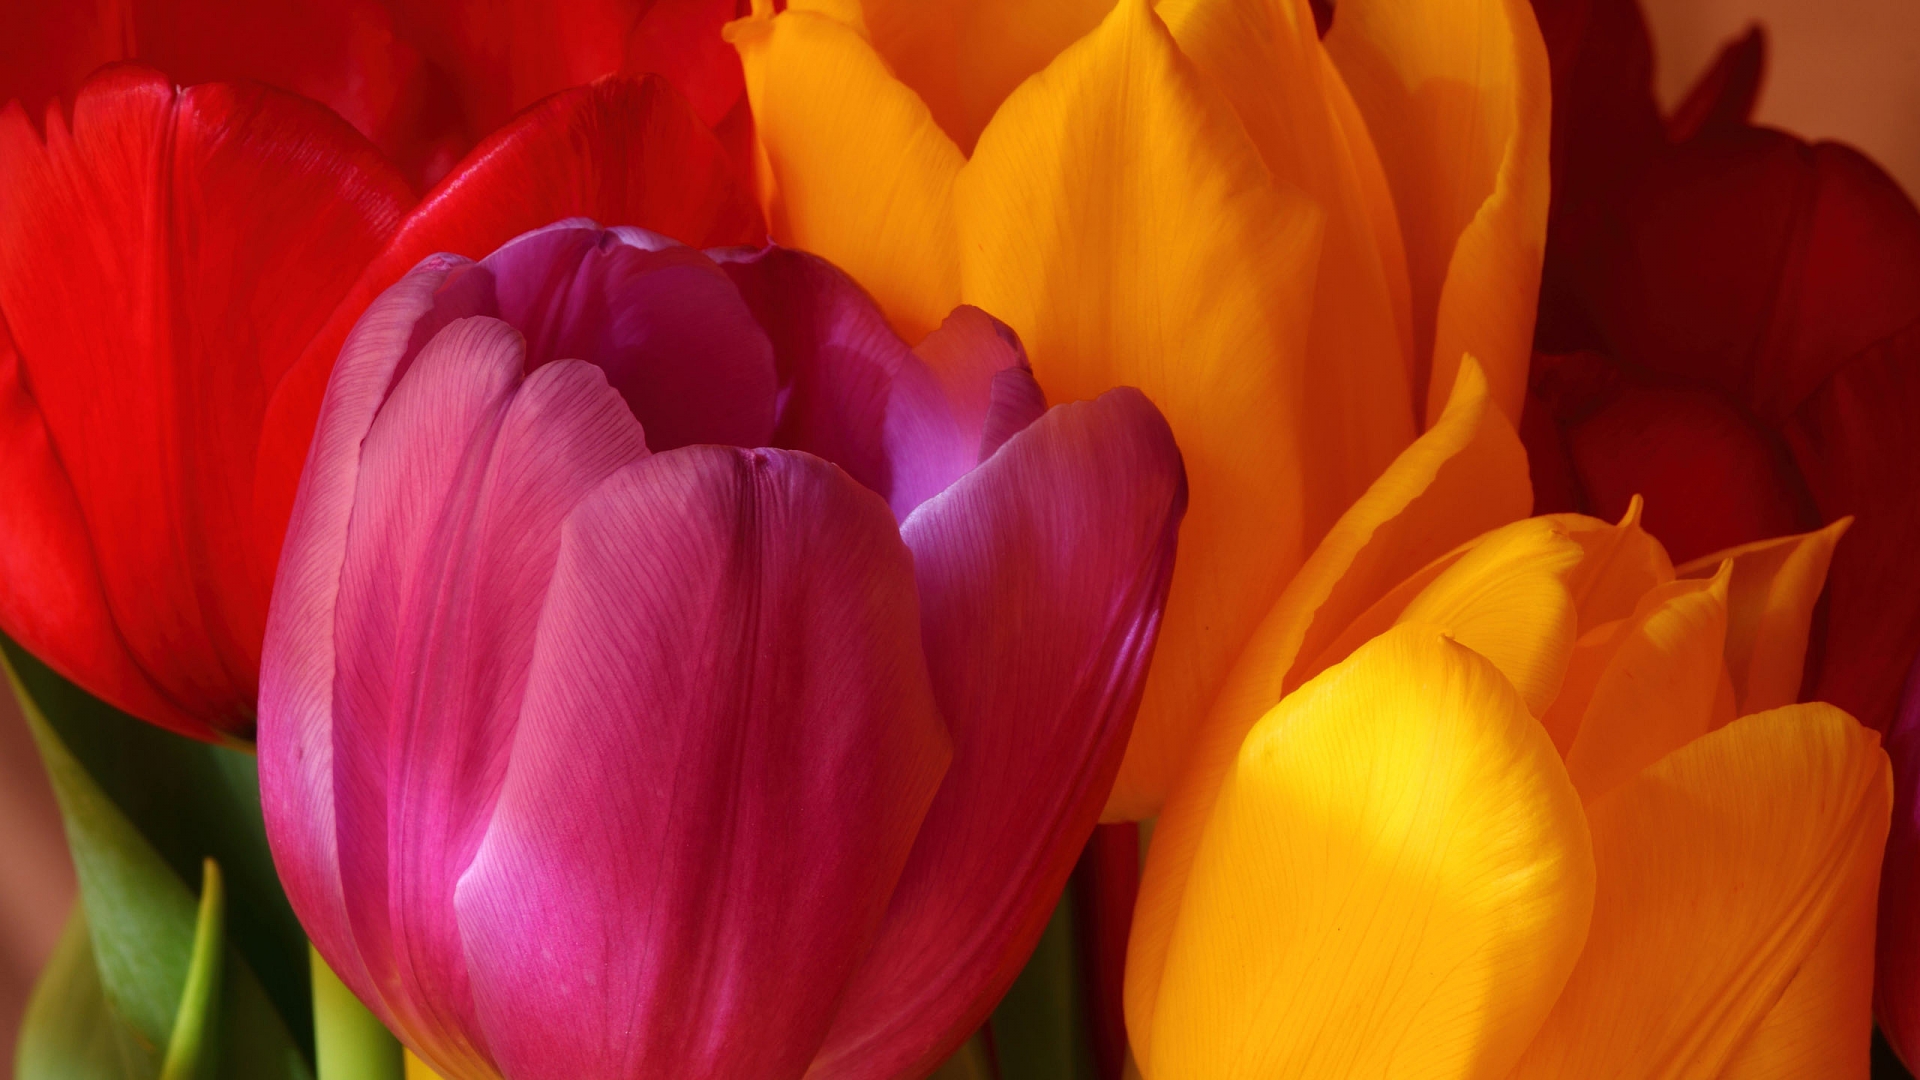 Beautiful Tulips for 1920 x 1080 HDTV 1080p resolution